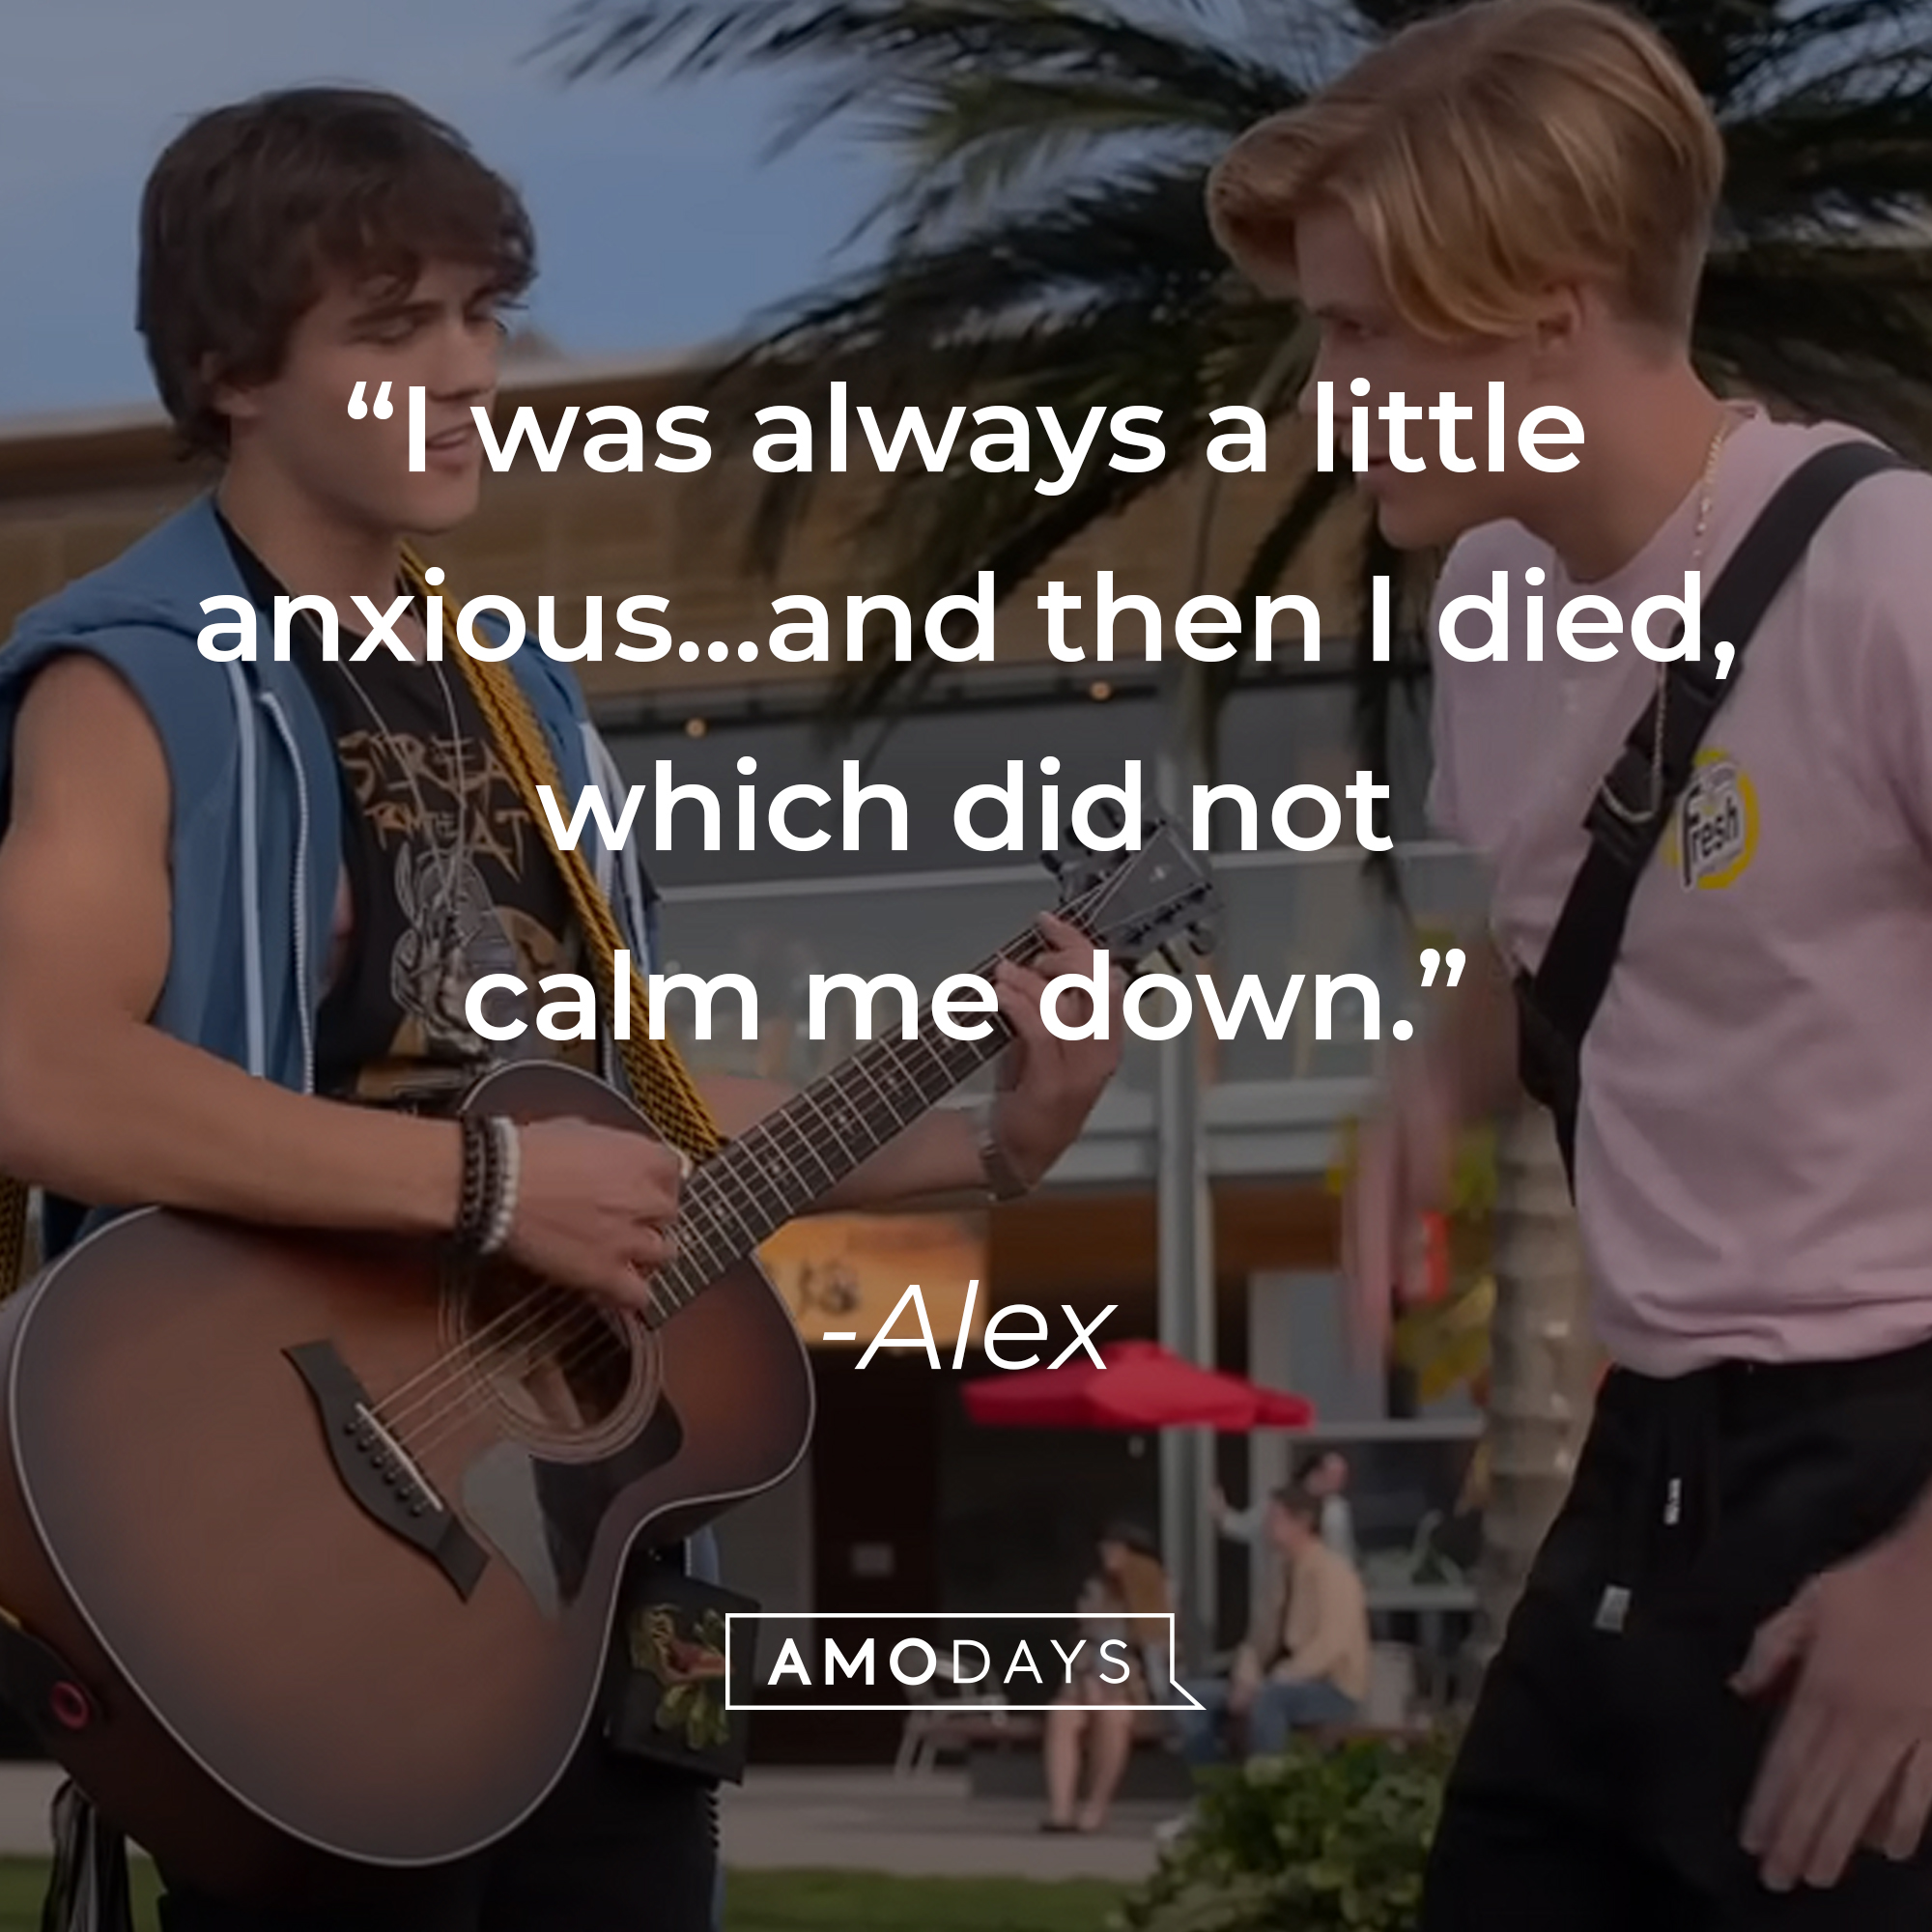 An image of the “Julia and the Phantoms” band members with Alex’s quote "I was always a little anxious...and then I died, which did not calm me down." | Source: youtube.com/netflixafterschool